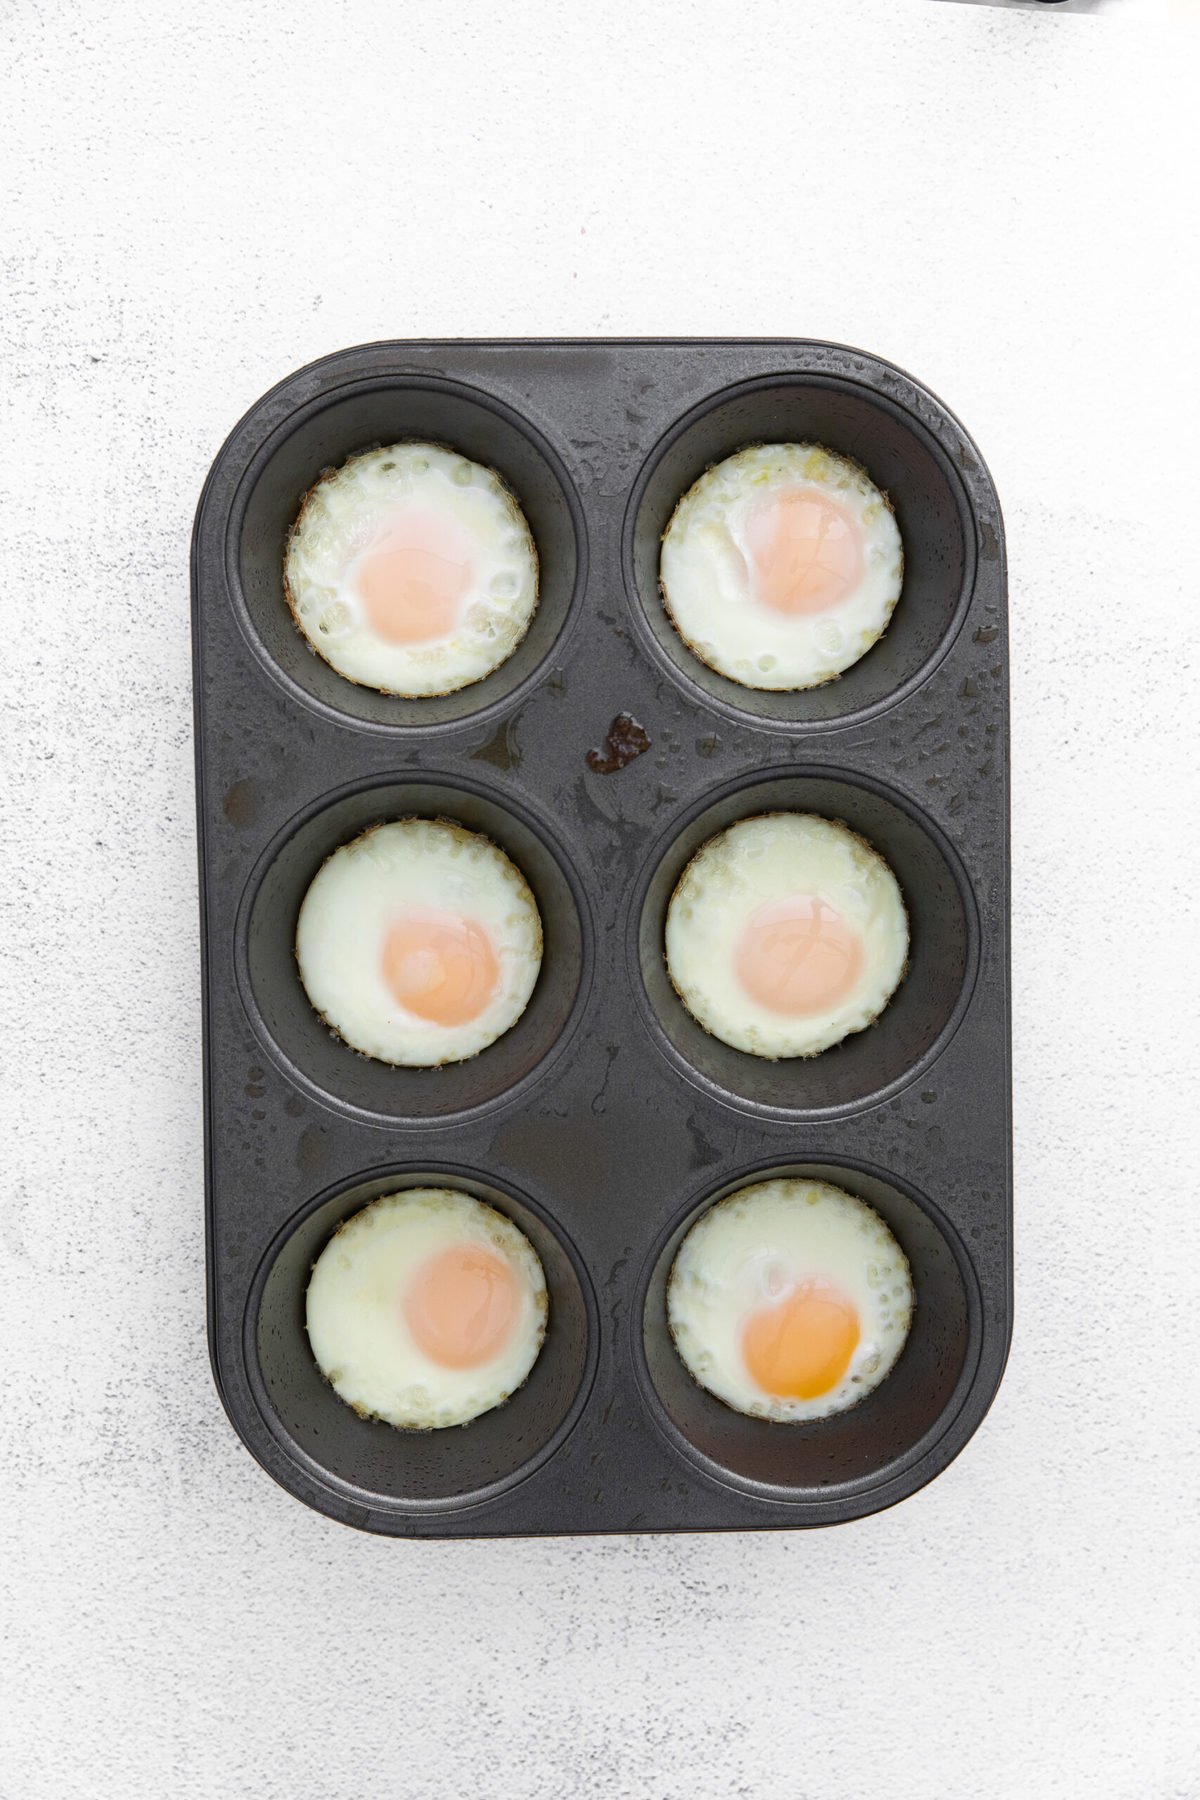 https://fitfoodiefinds.com/wp-content/uploads/2021/02/Baked-Eggs-25-scaled.jpg